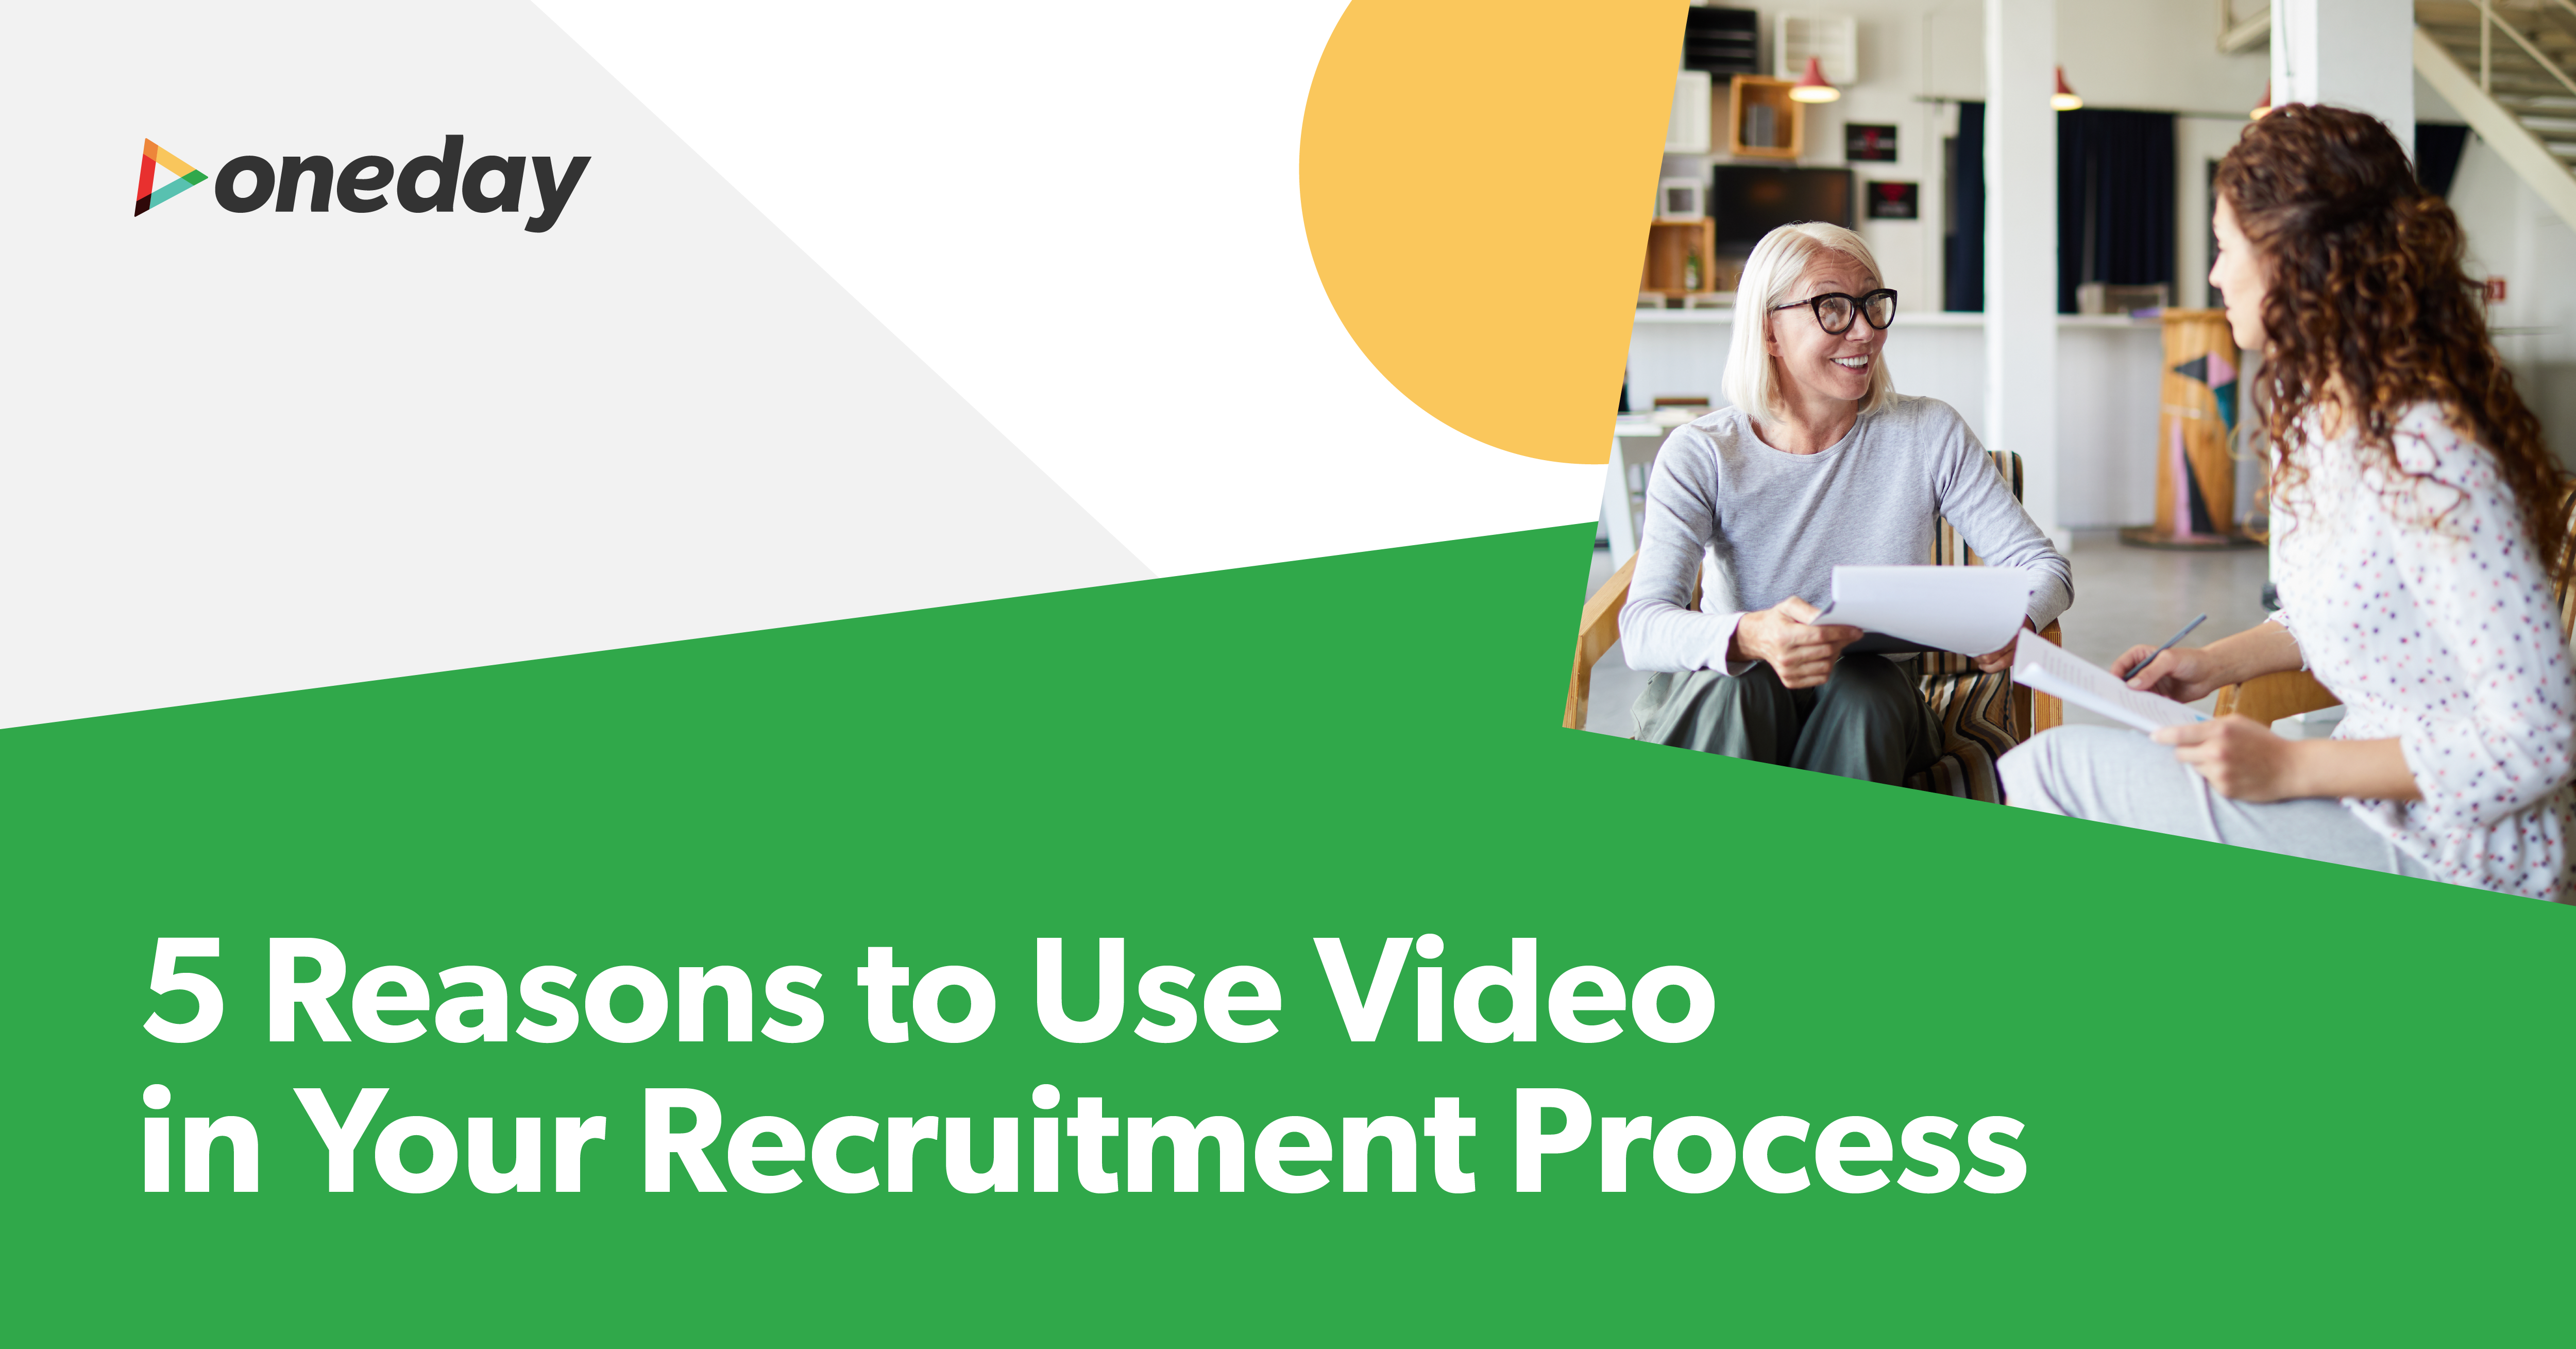 A discussion on what makes video such a powerful tool in the recruitment process and combating the lack of new talent plaguing so many organizations today.